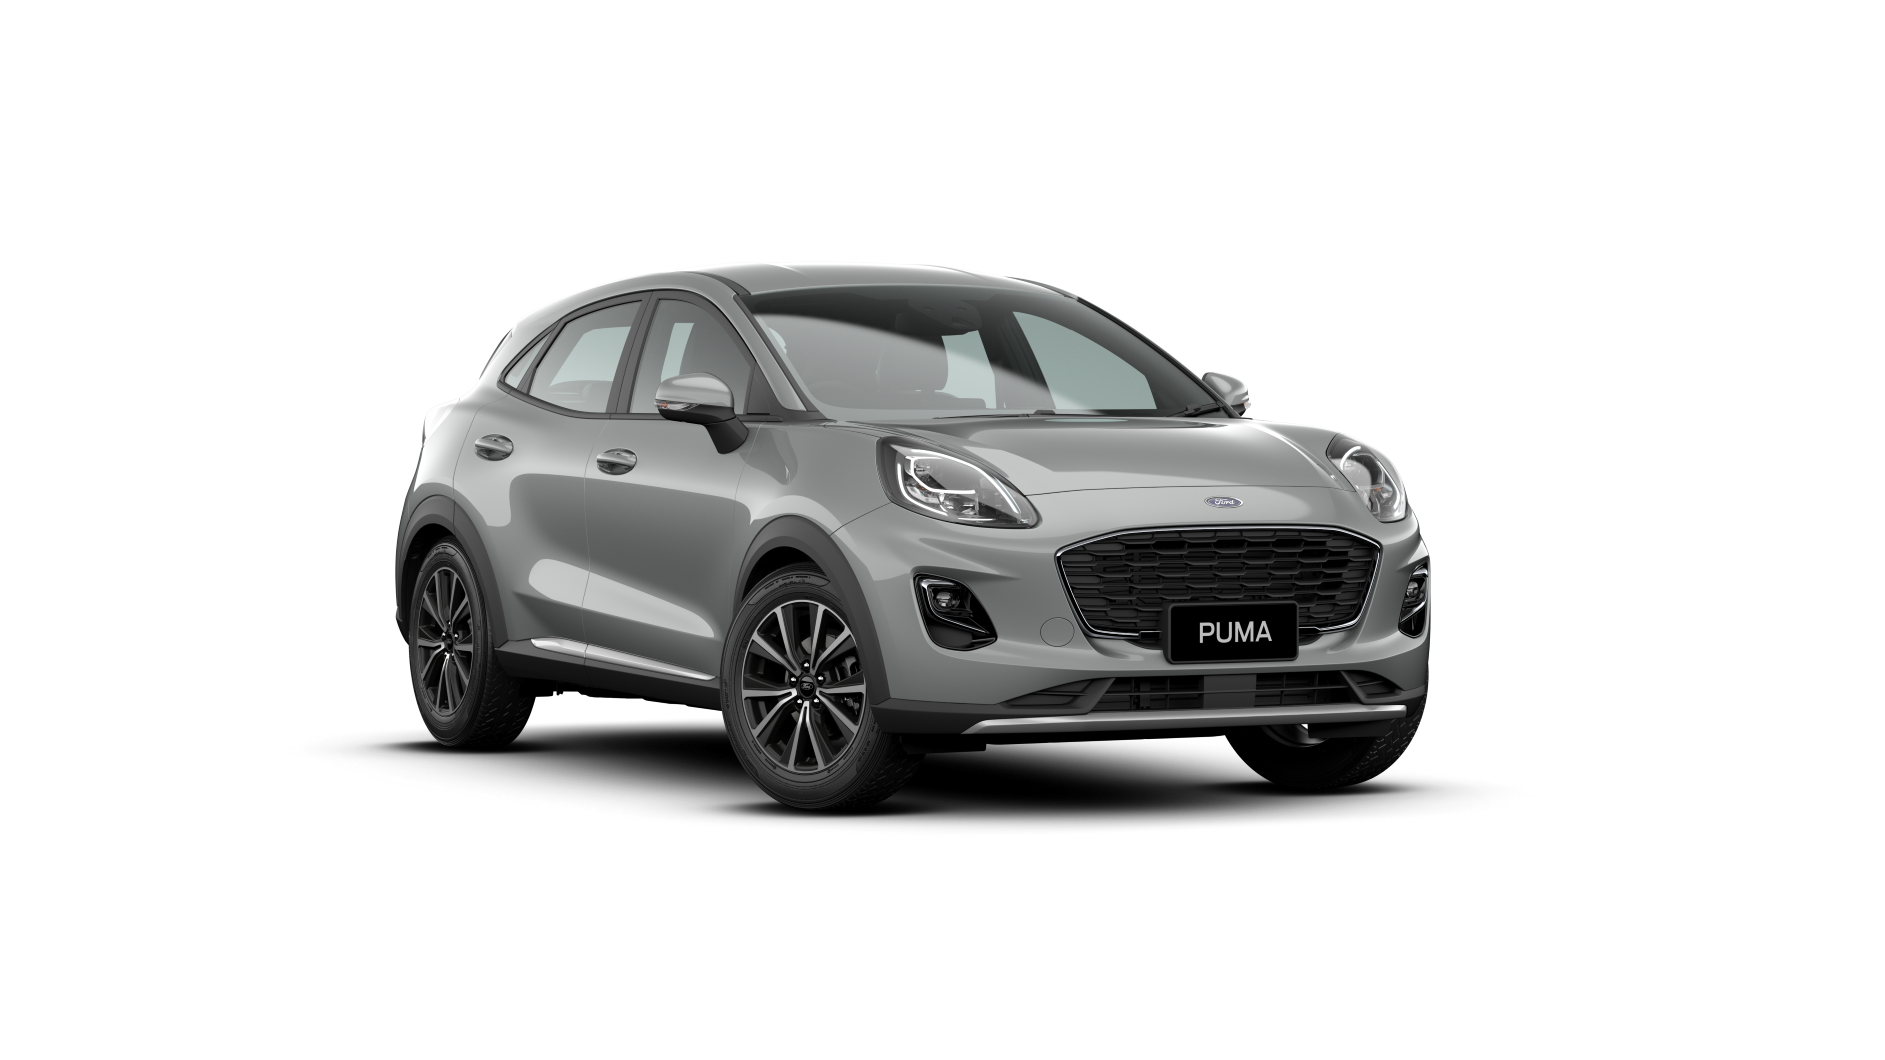 Award-Winning
                                                        Ford Puma line up for New Zealand brings new levels of smart
                                                        technology and inspiring design to an otherwise crowded,
                                                        lookalike SUV segment main image